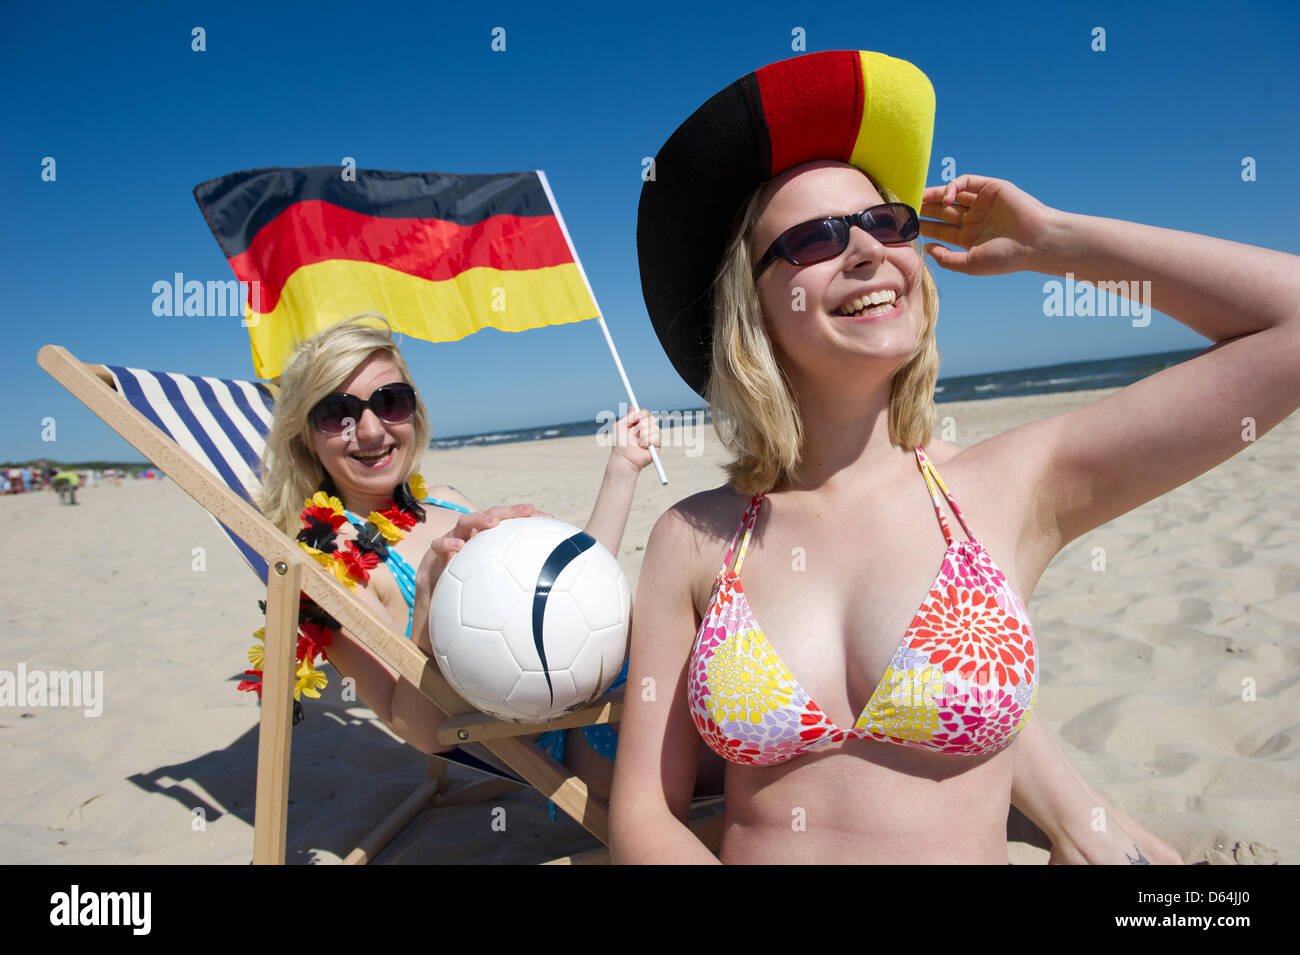 ILLUSTRATION - Natalie and Jule (L-R) hold German flags in preparation for the European Championships at the Baltic Sea beach of Trassenheide, Germany, 25 May 2012. Public broadcaster ZDF plans to cover the Euro 2012 and additional programmes from the Island of Usedom. Photo: Stefan Sauer Stock Photo